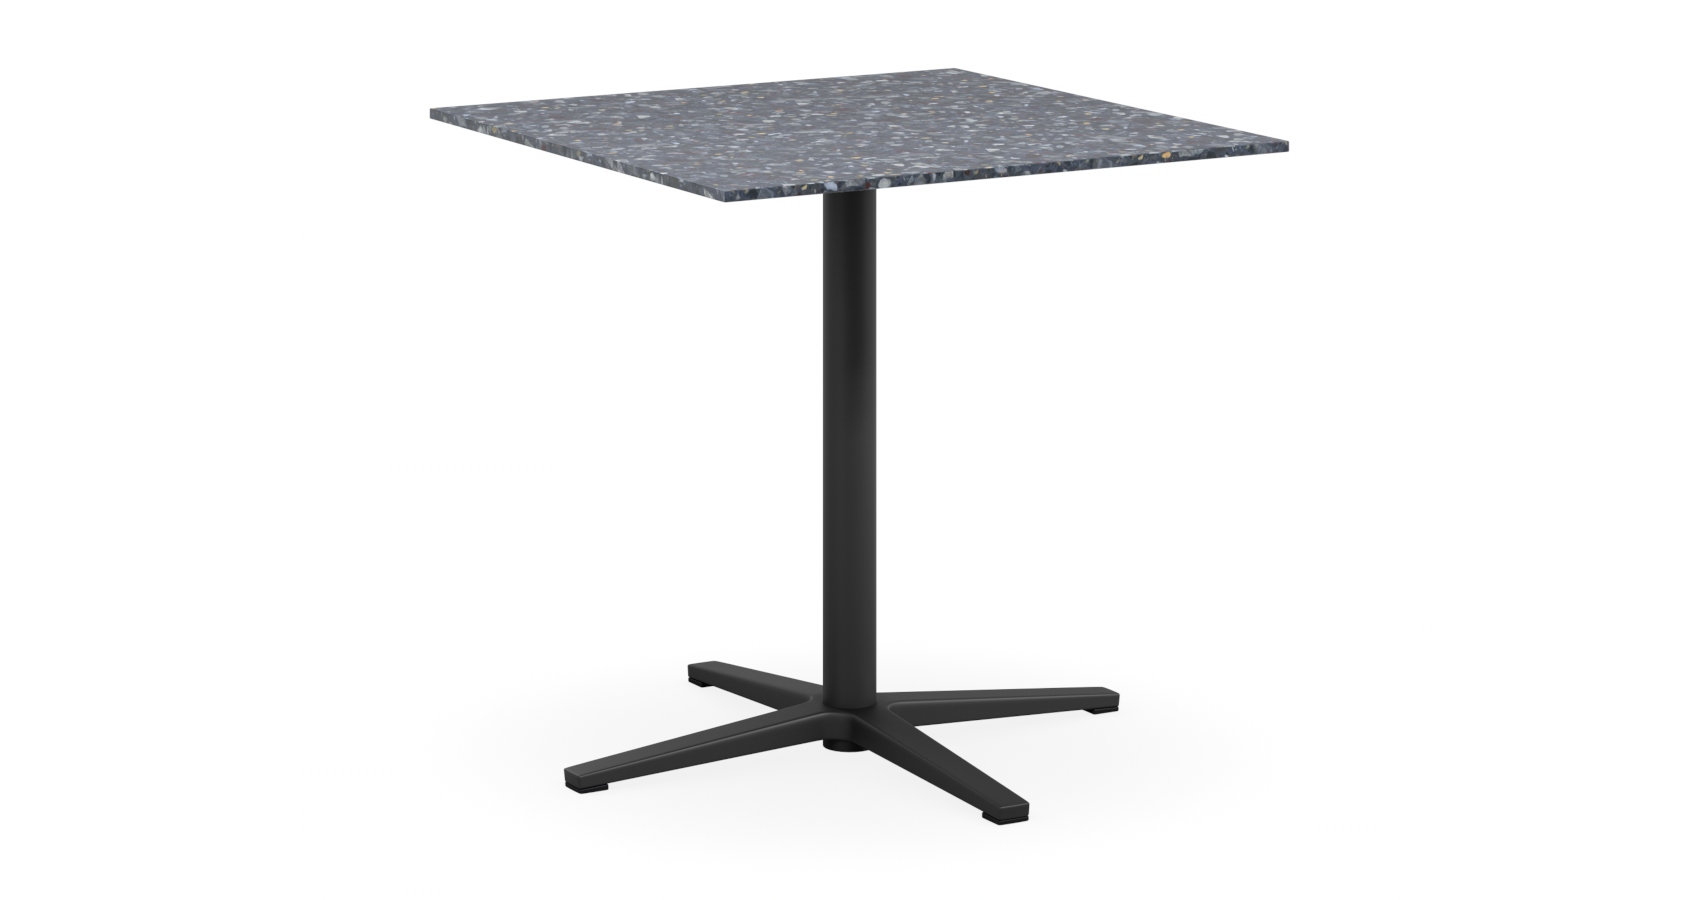 Wiz table with black base and square Neo Terrazzo top